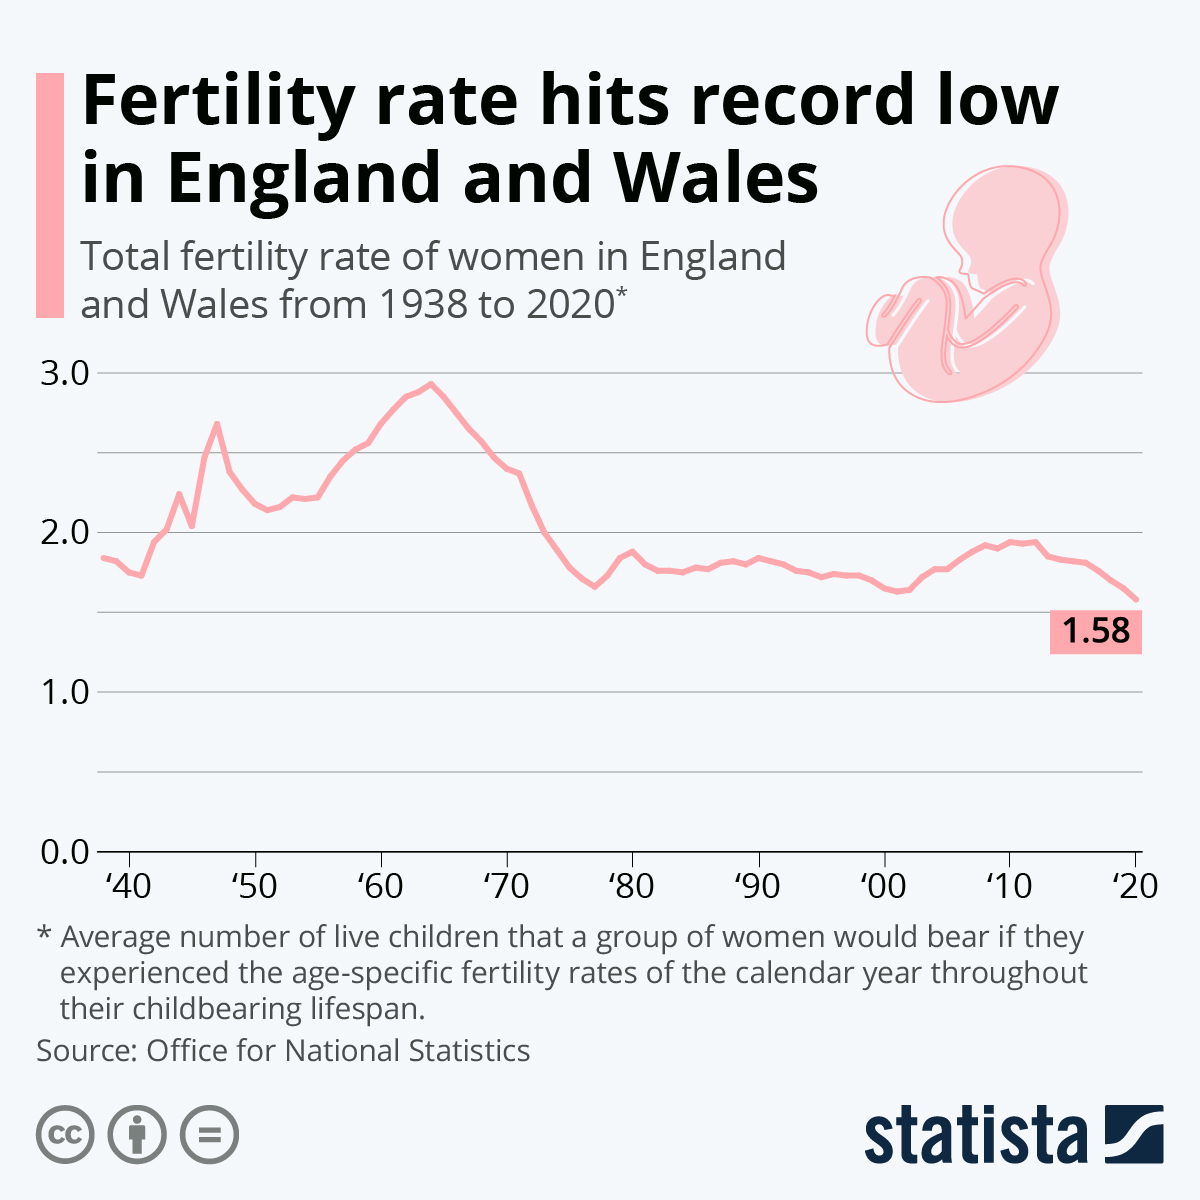 Fertility rate hits record low in England and Wales